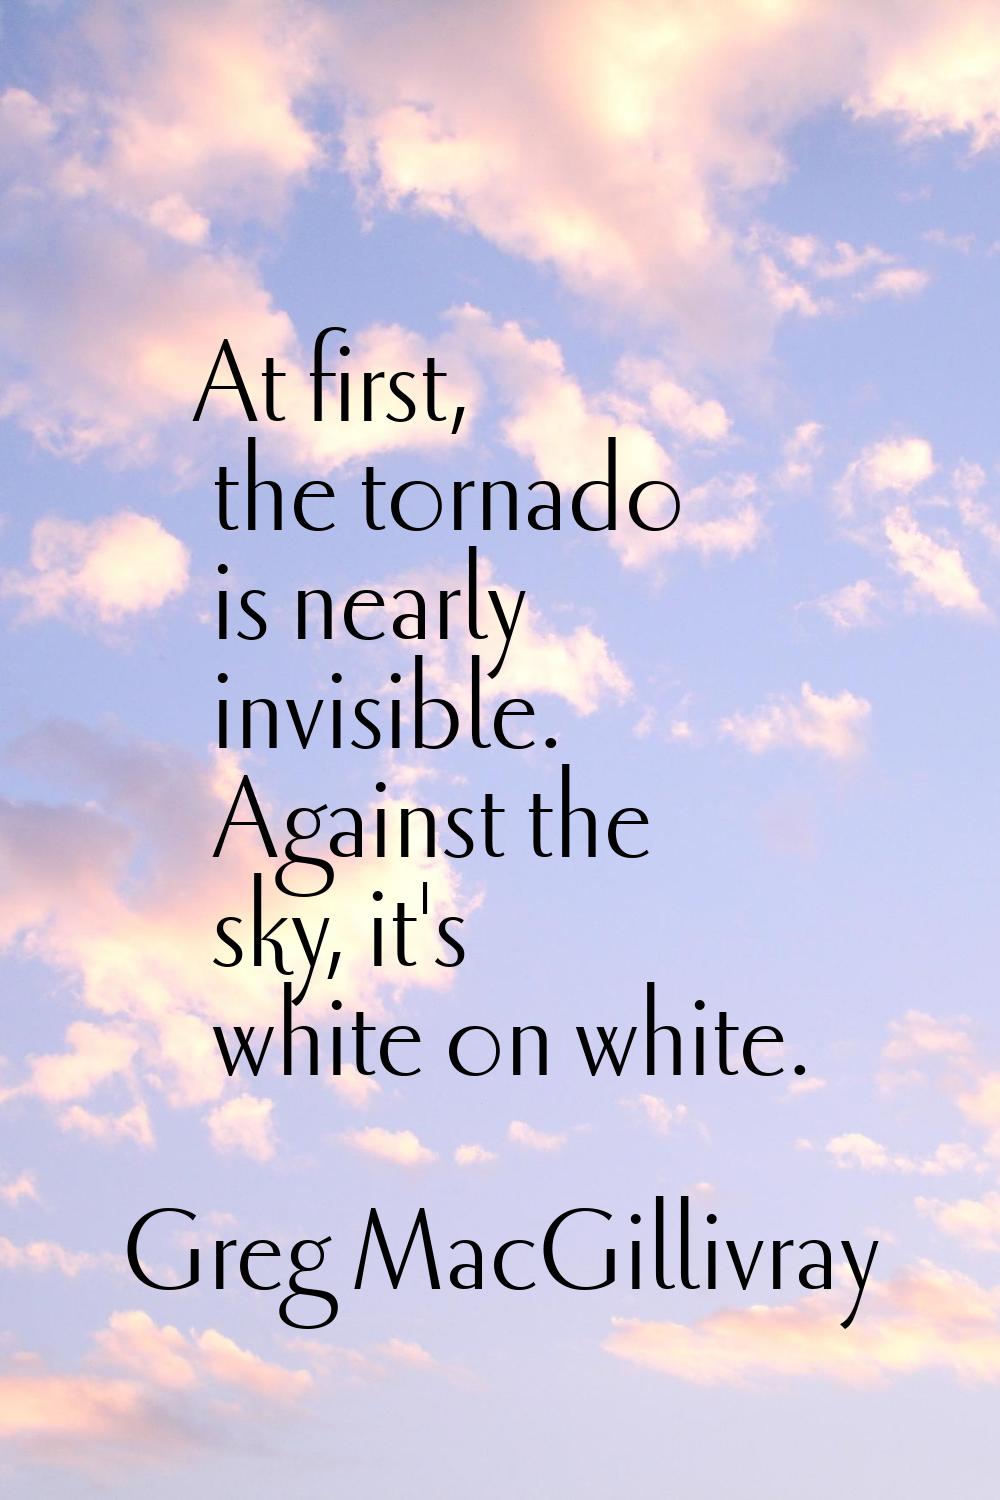 At first, the tornado is nearly invisible. Against the sky, it's white on white.